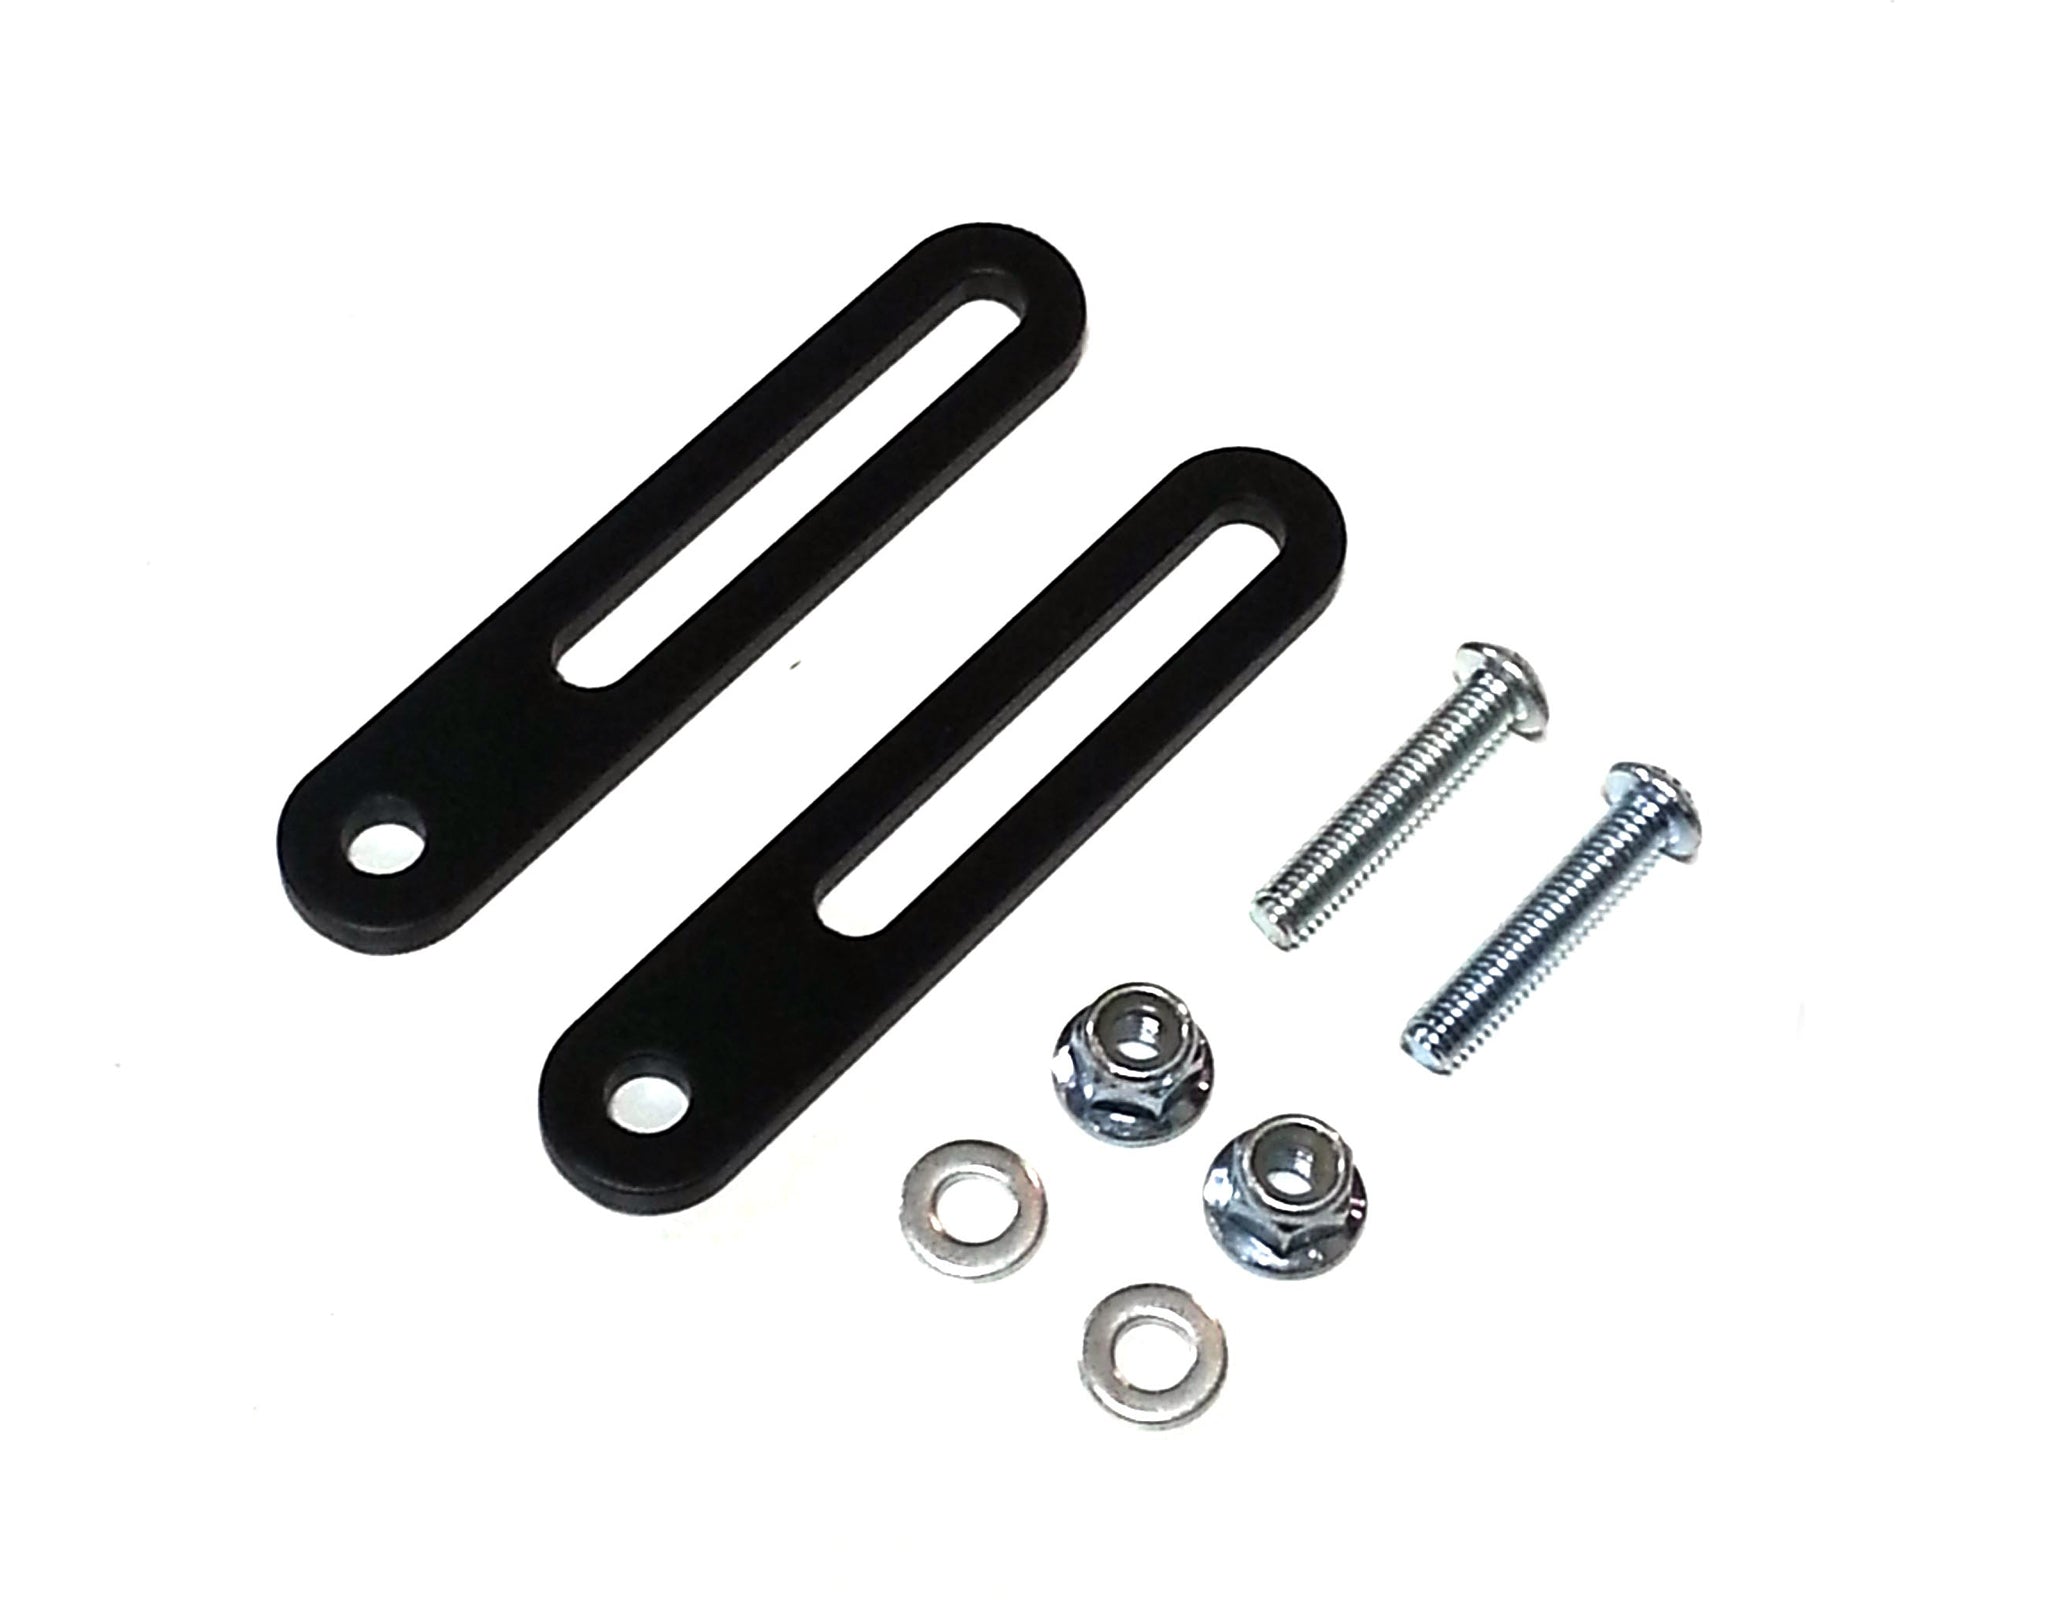 Siderack Accessory Mounting Kit for SW-MOTECH sideracks